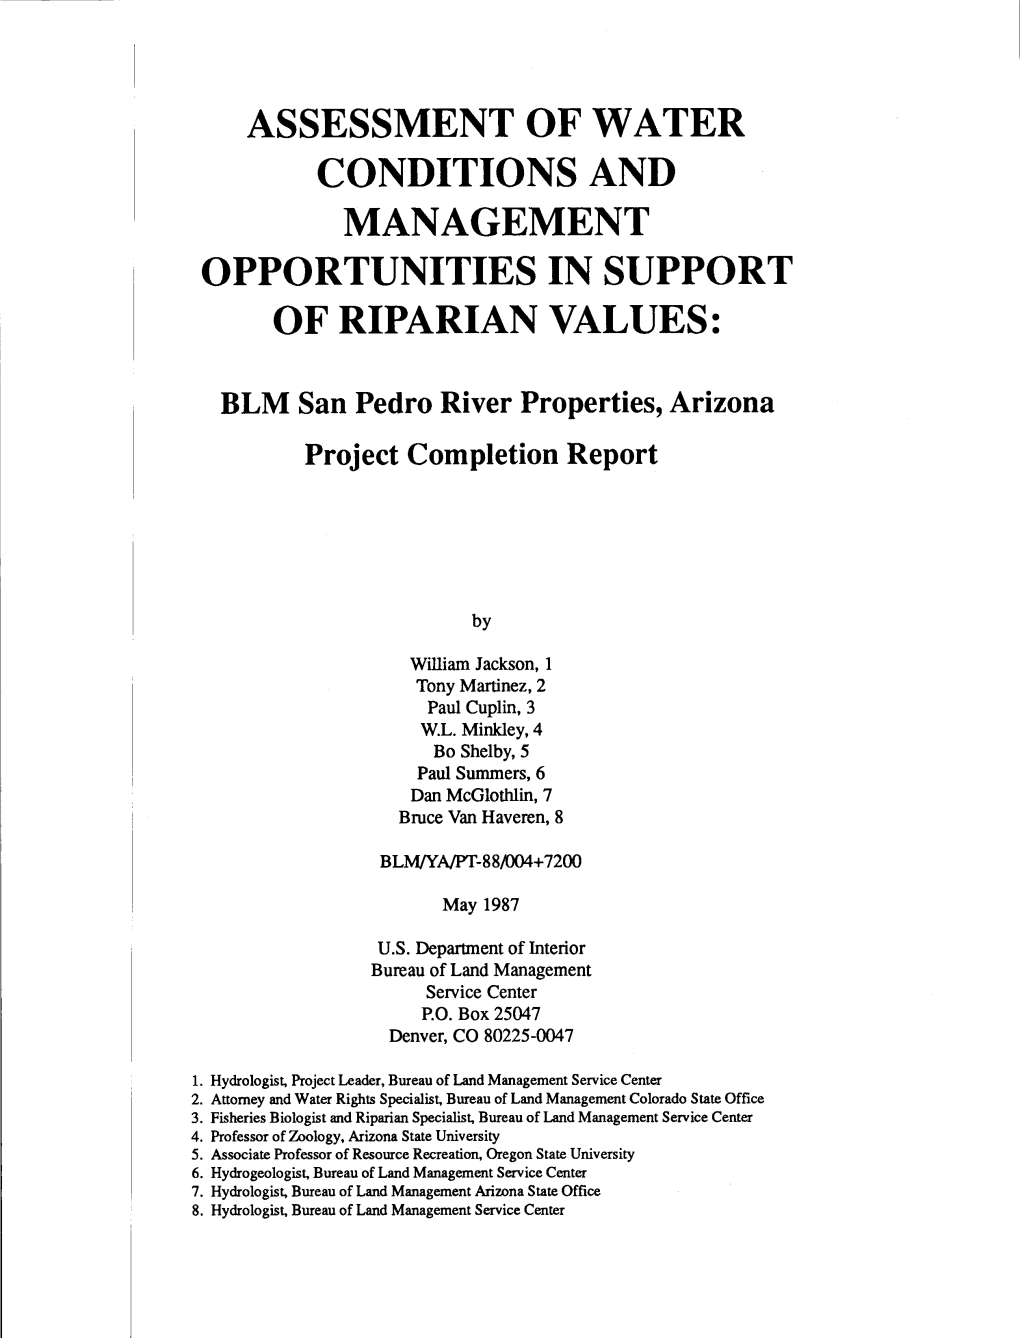 Management Opportunities in Support of Riparian Values